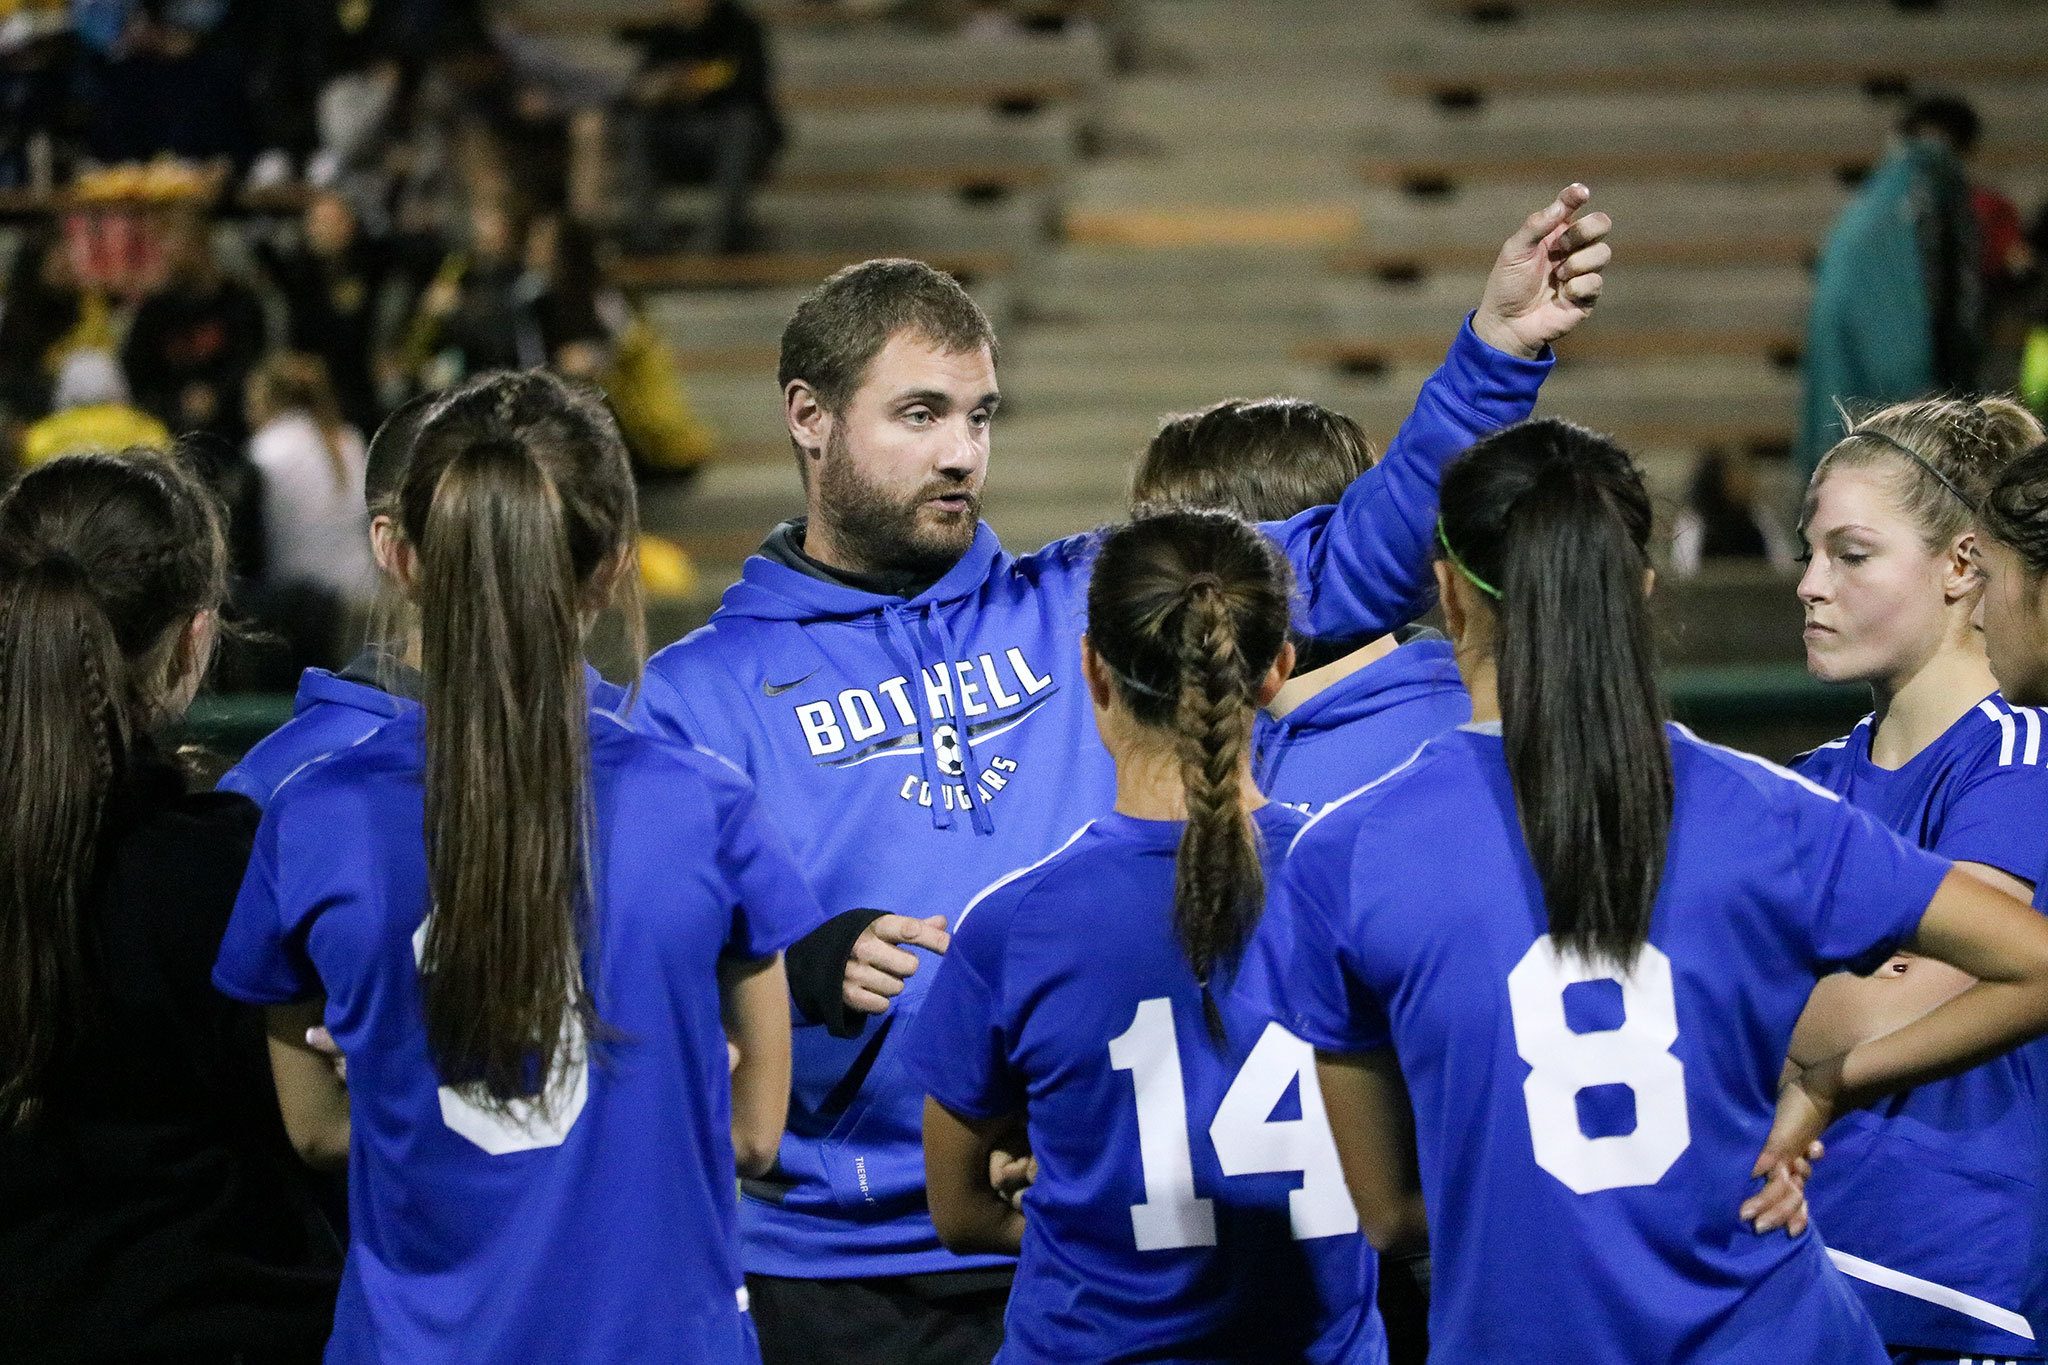 Bothell High girls soccer coach Shawn Warner speaks to his team at halftime of the Cougars’ 2-1 victory over Inglemoor in the season finale. JOHN WILLIAM HOWARD/Bothell-Kenmore Reporter